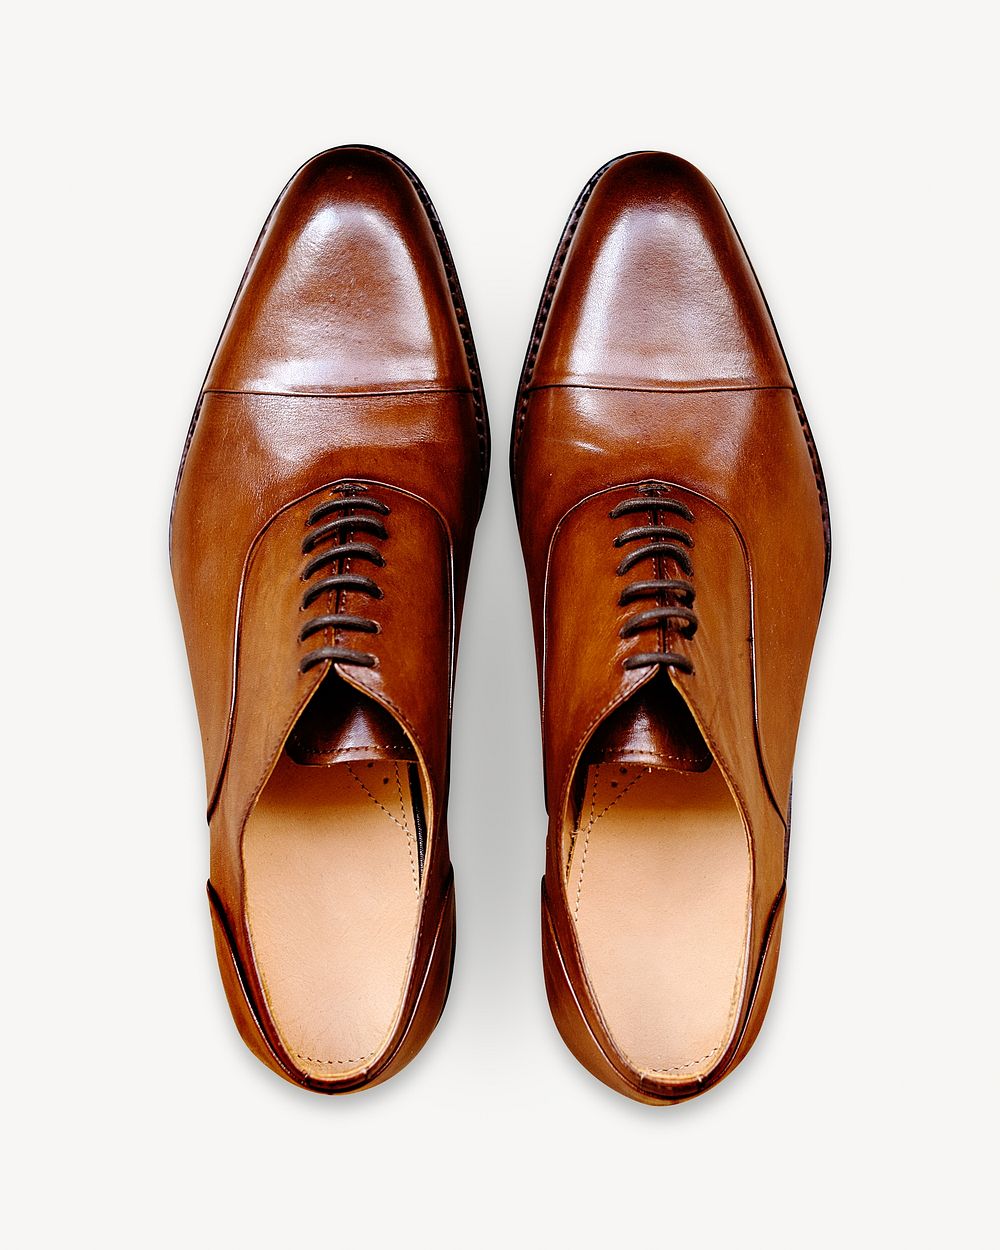 Leather shoes isolated image